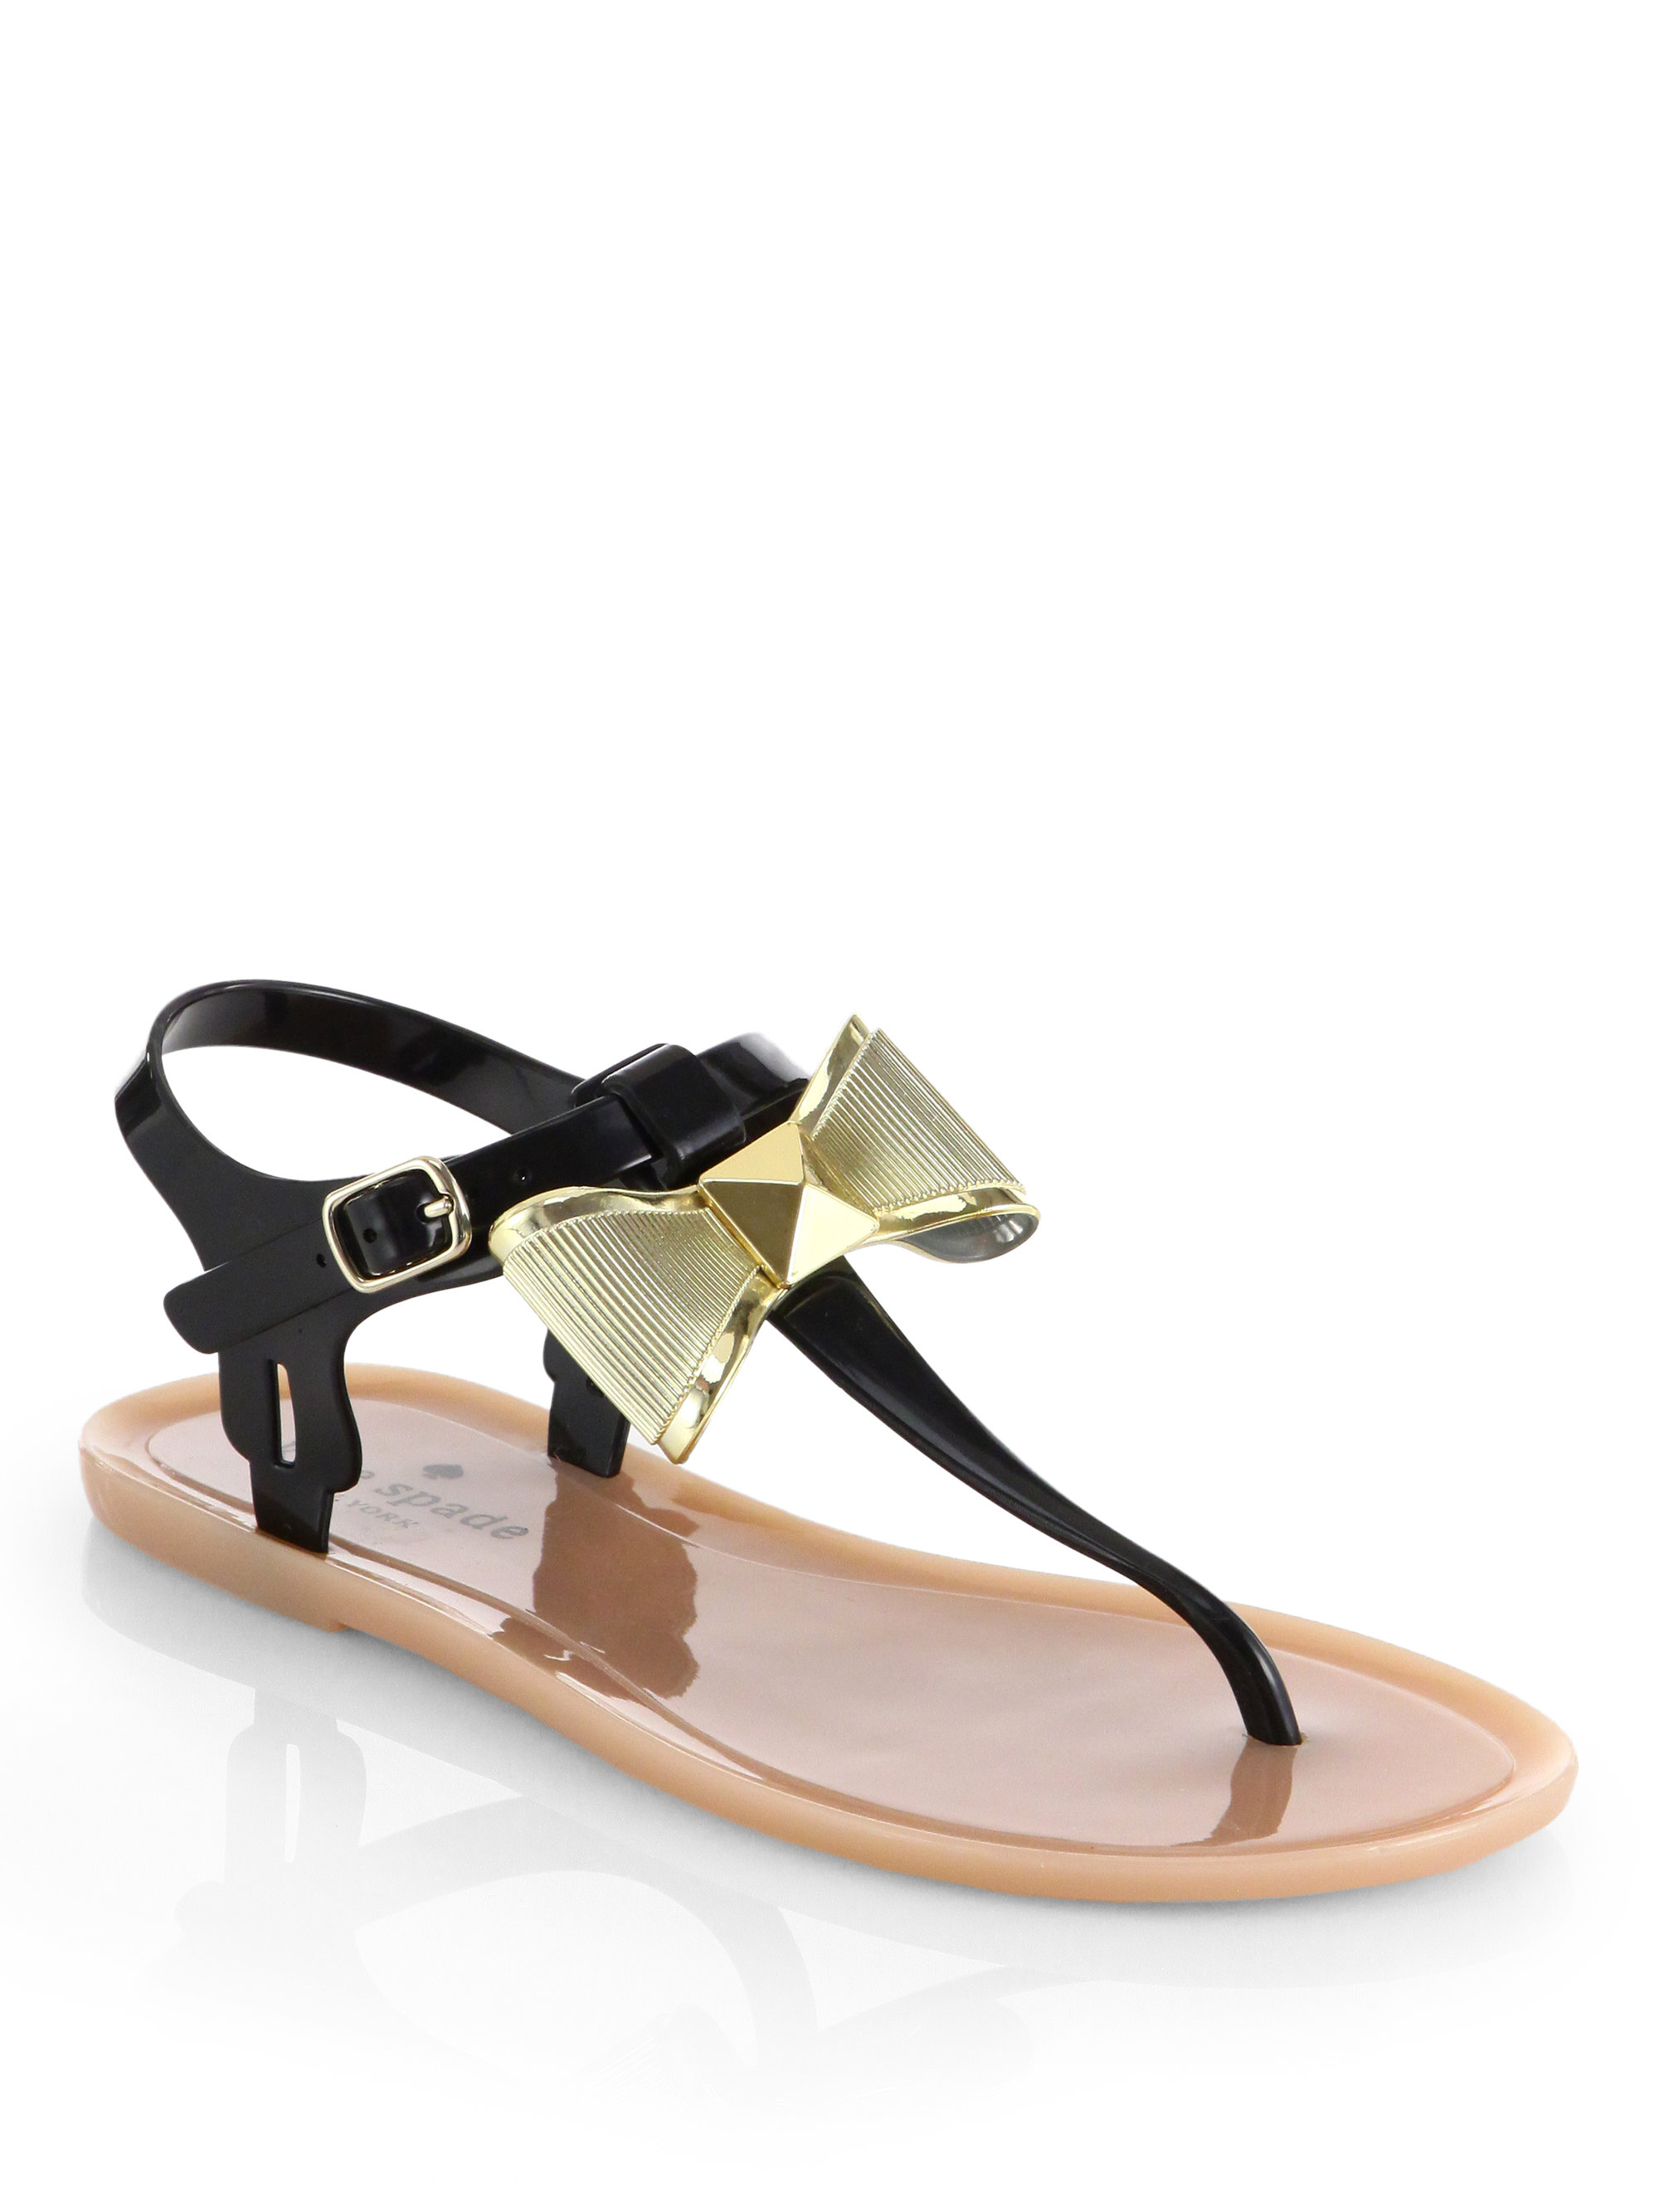 Kate Spade Fab Jelly Bow Sandals in Black | Lyst